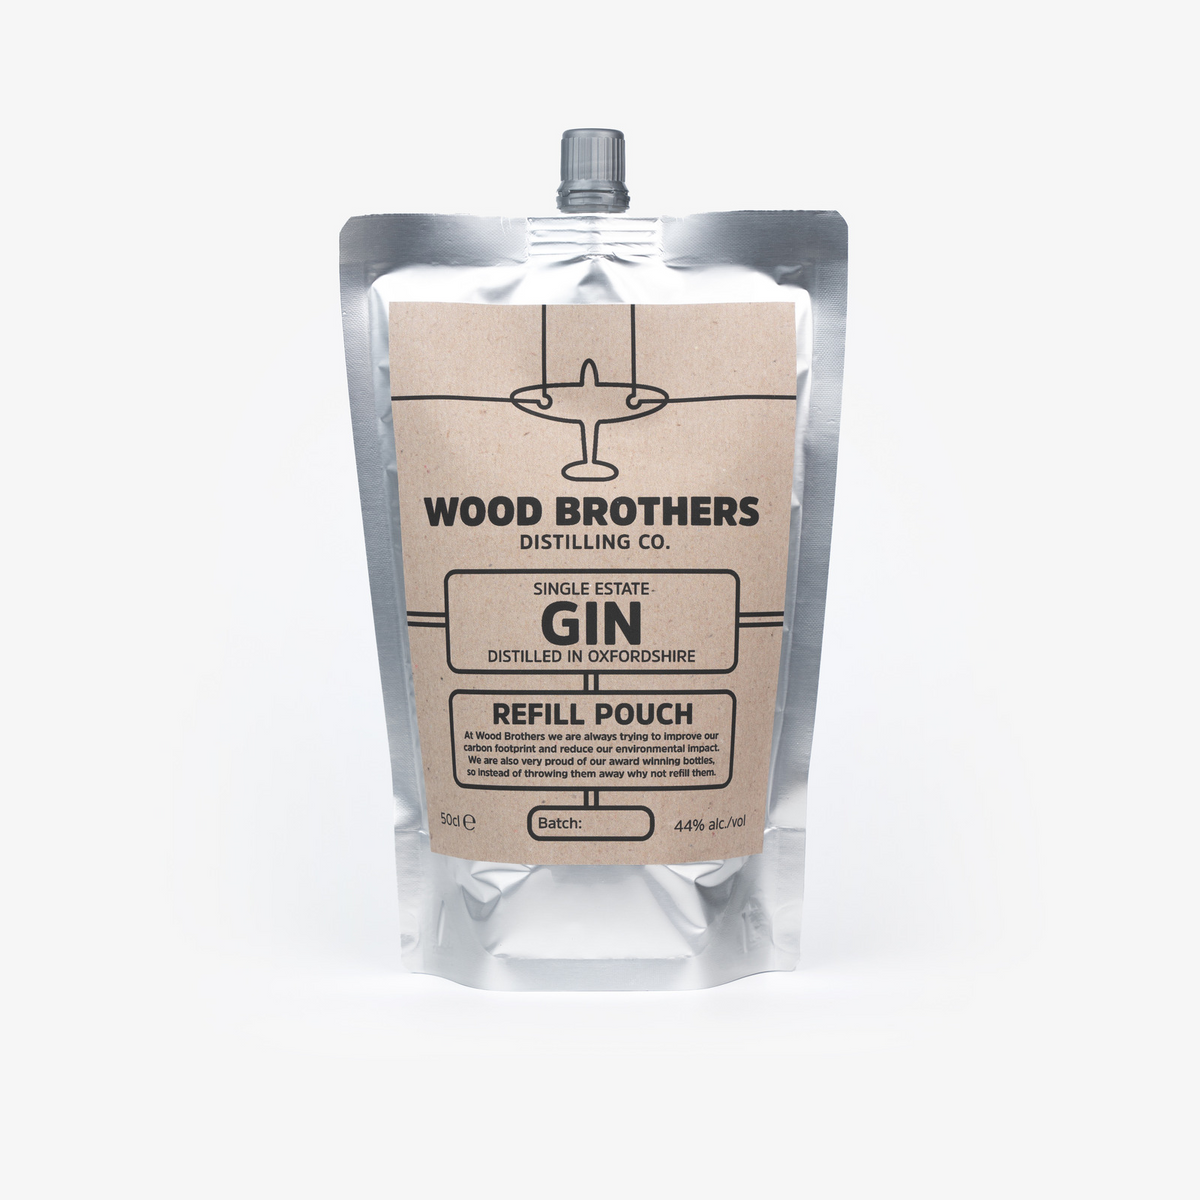 Wood Brothers Gin Eco Refill Pouch 500ml